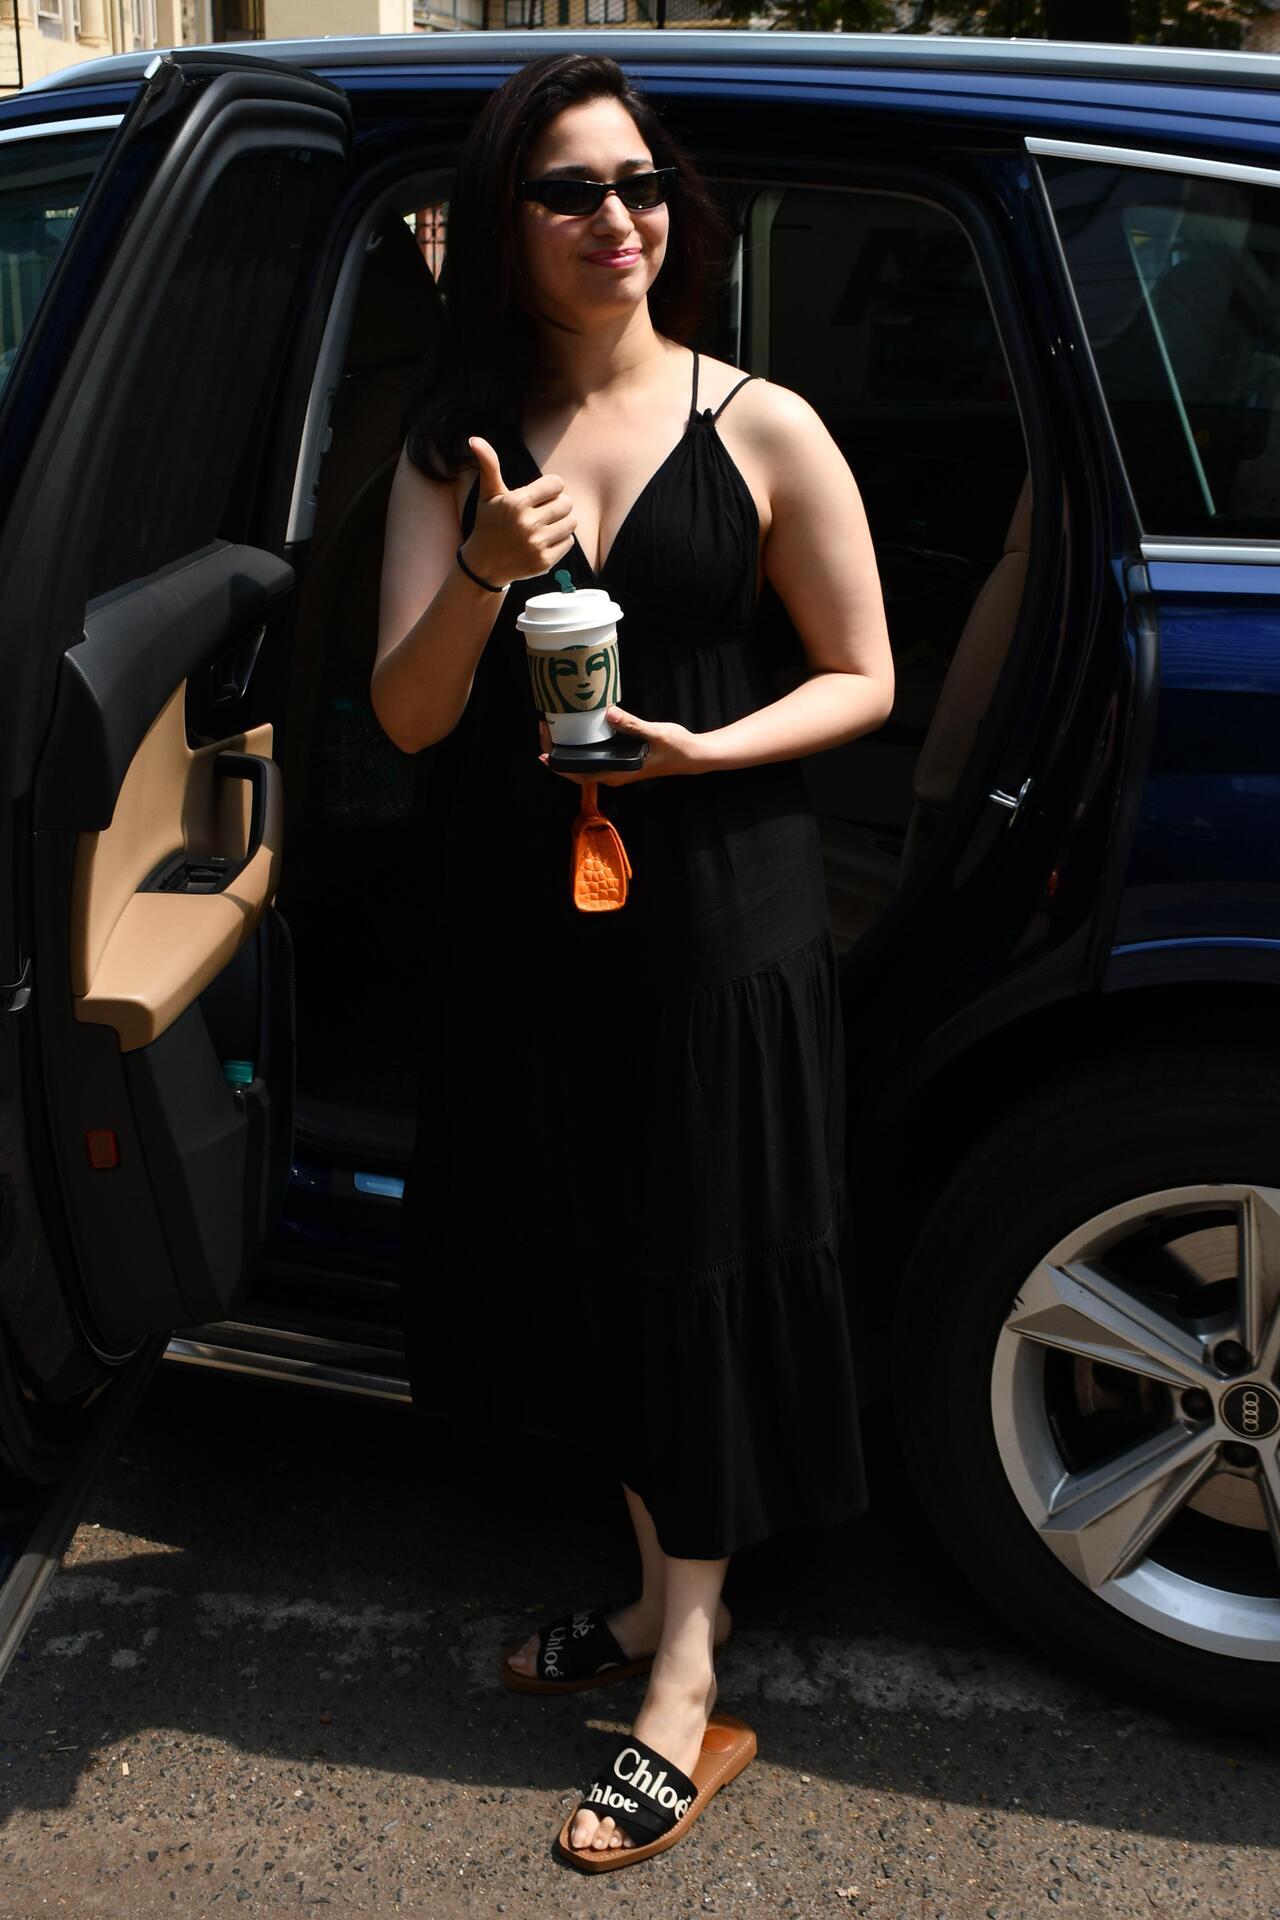 Tamannaah Bhatia was spotted in an all-black outfit in the city